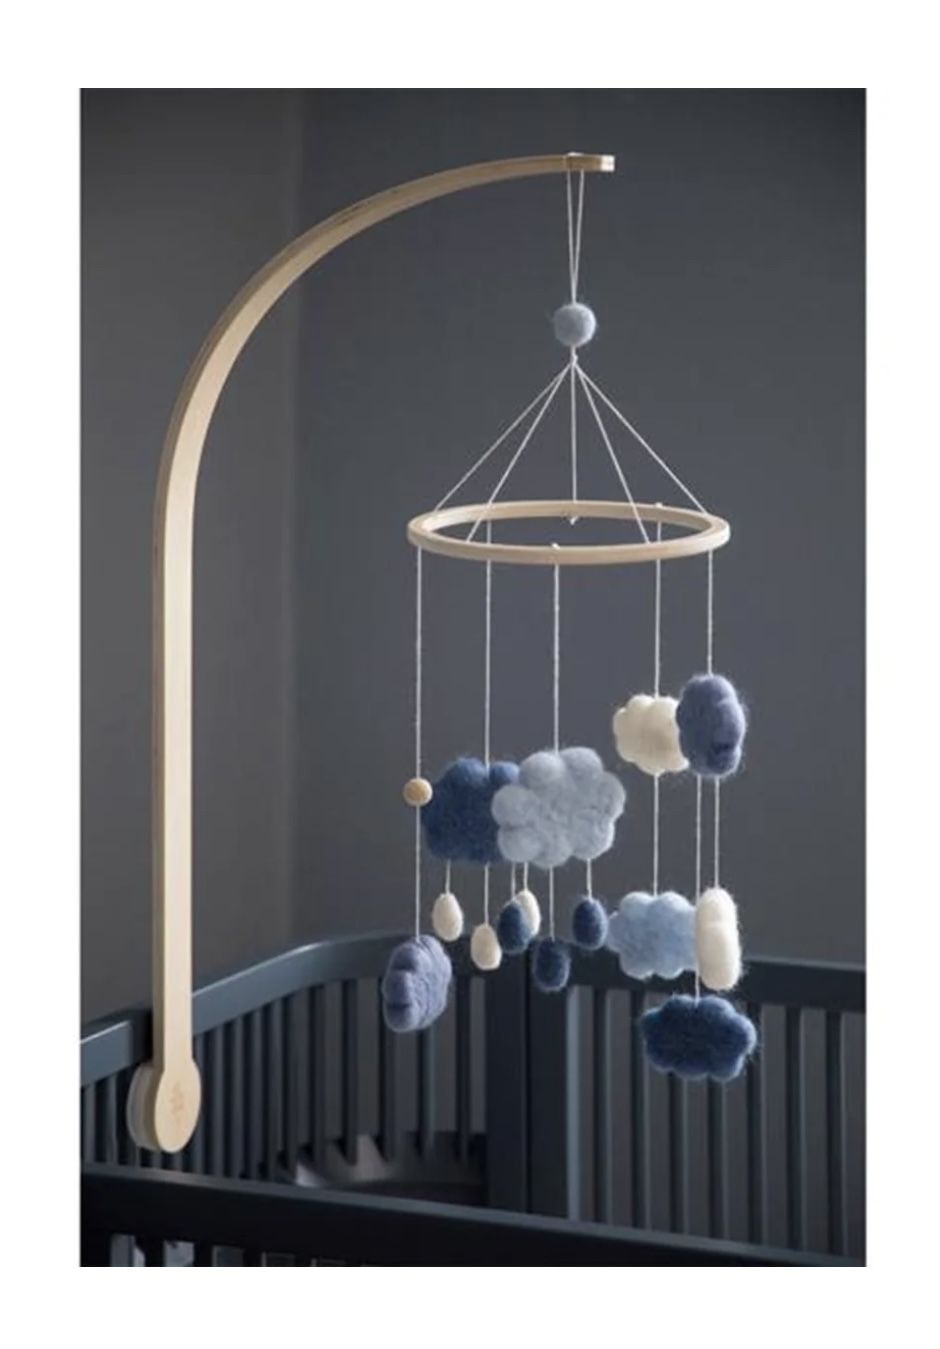 New Clouds Felted baby crib mobile by Sebra